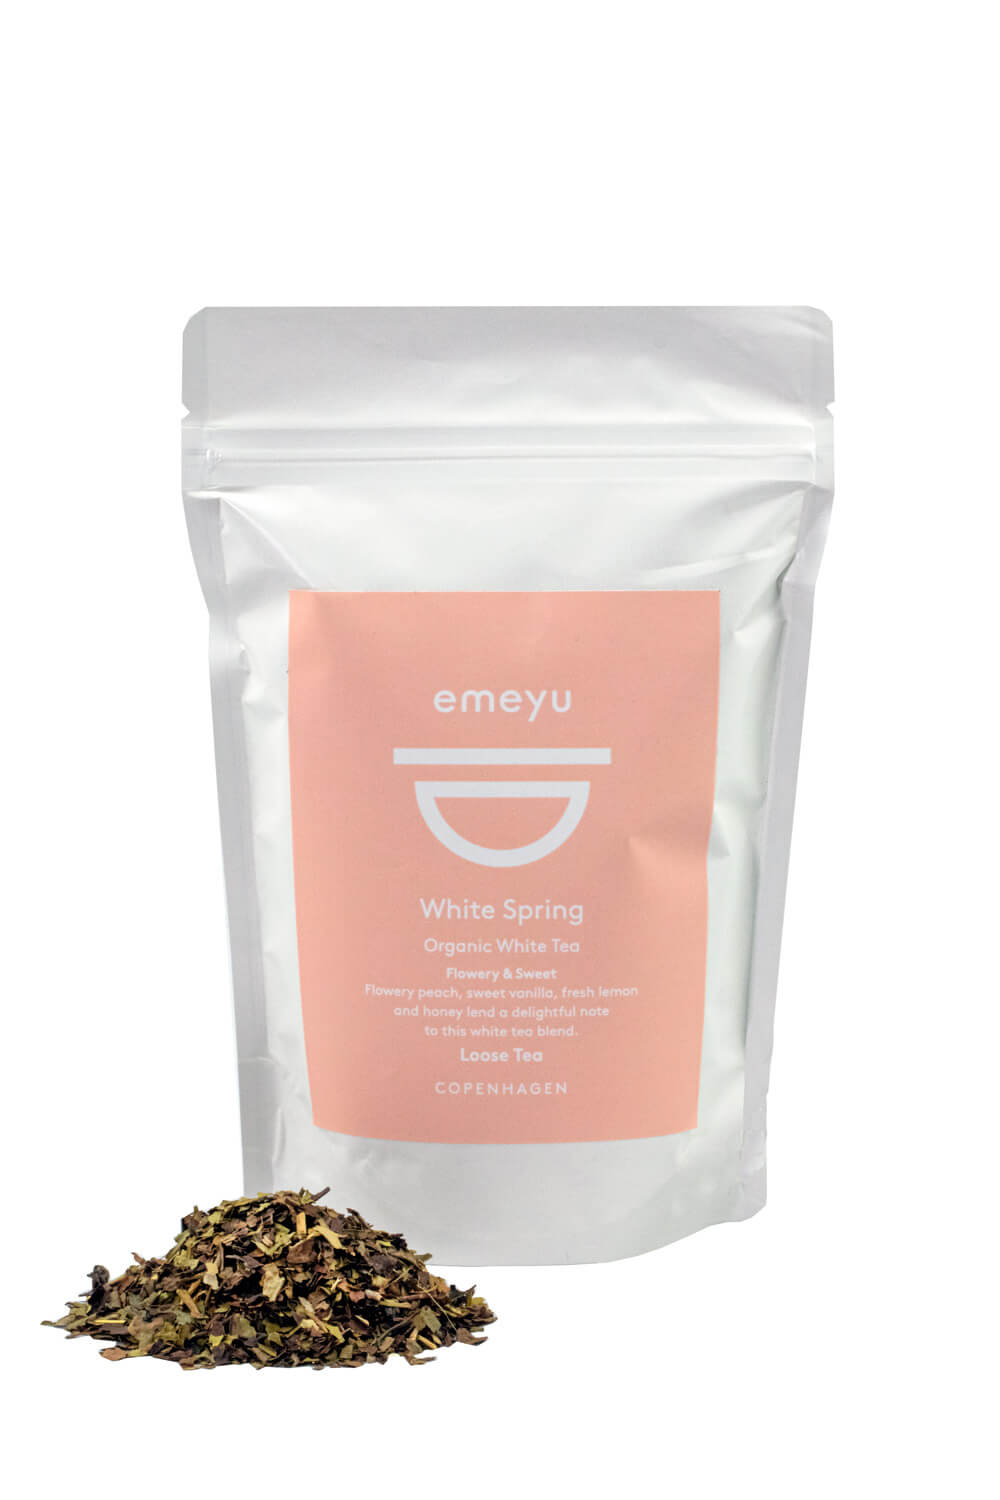 White Spring organic white tea as a base in a blend with mild and sweet note of flowery peach, sweet vanilla, fresh lemon and honey. 80 gr loose tea in a resealable and sustainable bag.